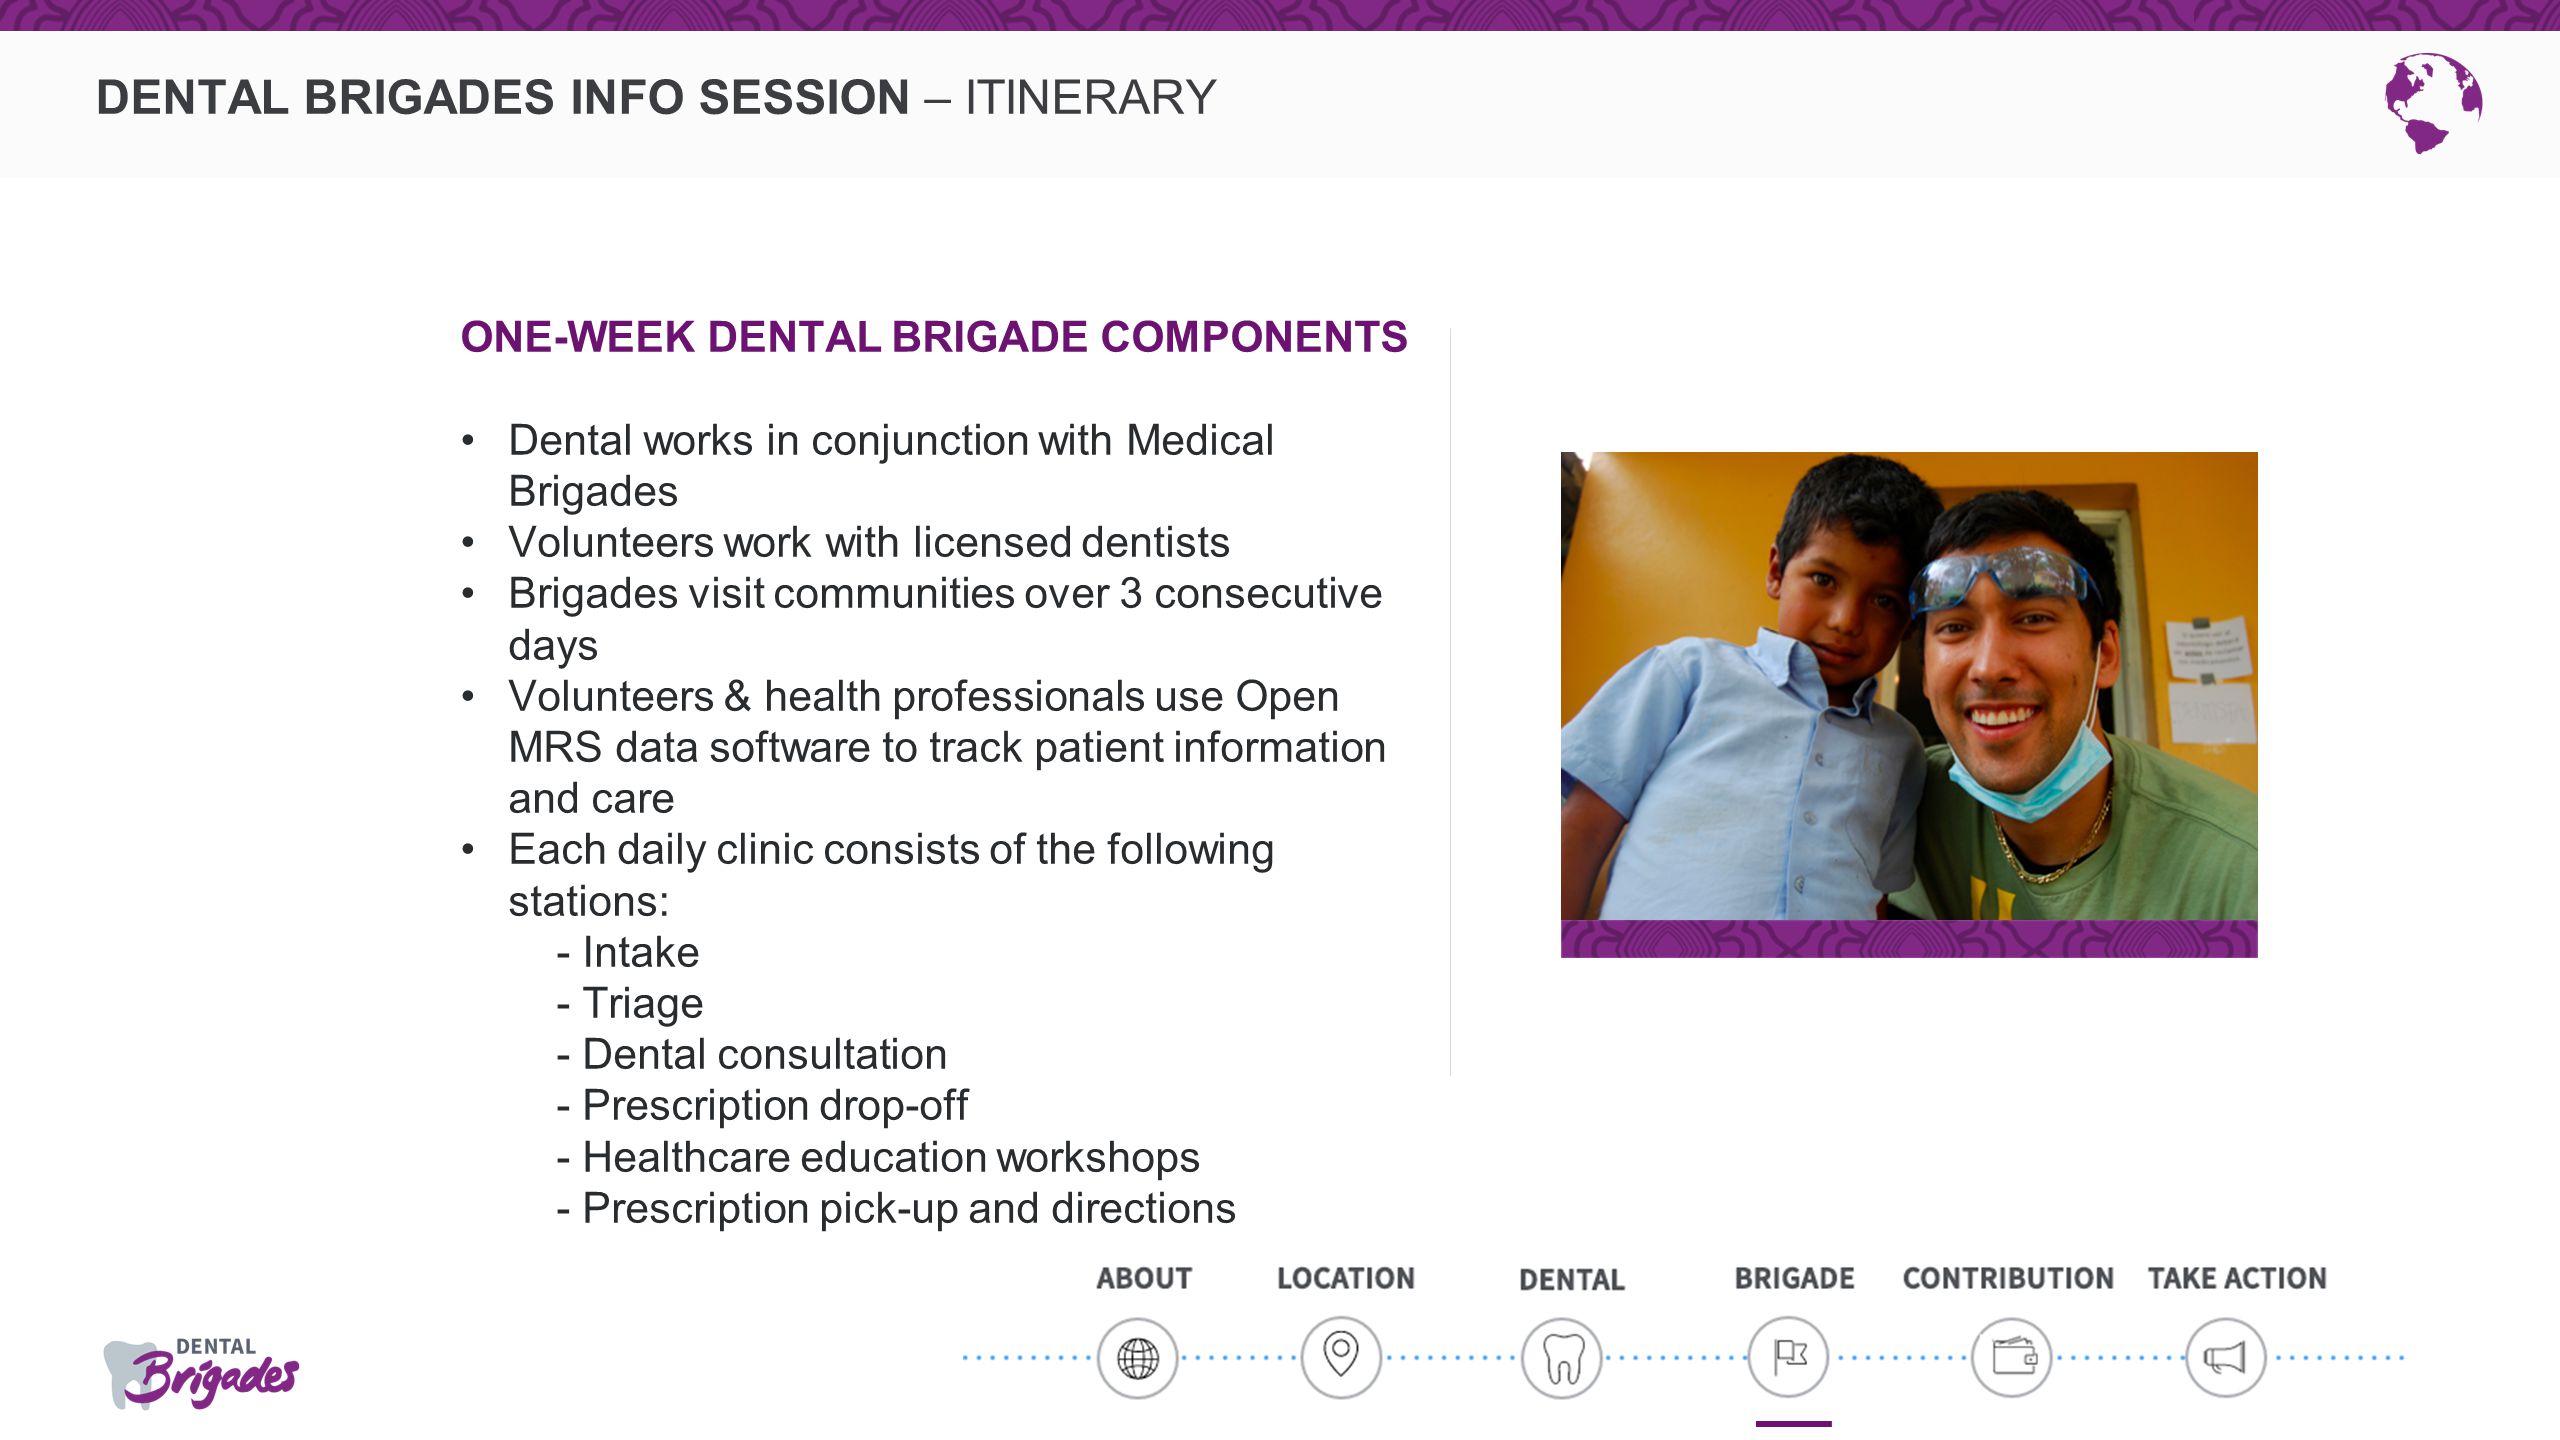 DENTAL BRIGADES INFO SESSION – ITINERARY ONE-WEEK DENTAL BRIGADE COMPONENTS Dental works in conjunction with Medical Brigades Volunteers work with licensed dentists Brigades visit communities over 3 consecutive days Volunteers & health professionals use Open MRS data software to track patient information and care Each daily clinic consists of the following stations: - Intake - Triage - Dental consultation - Prescription drop-off - Healthcare education workshops - Prescription pick-up and directions